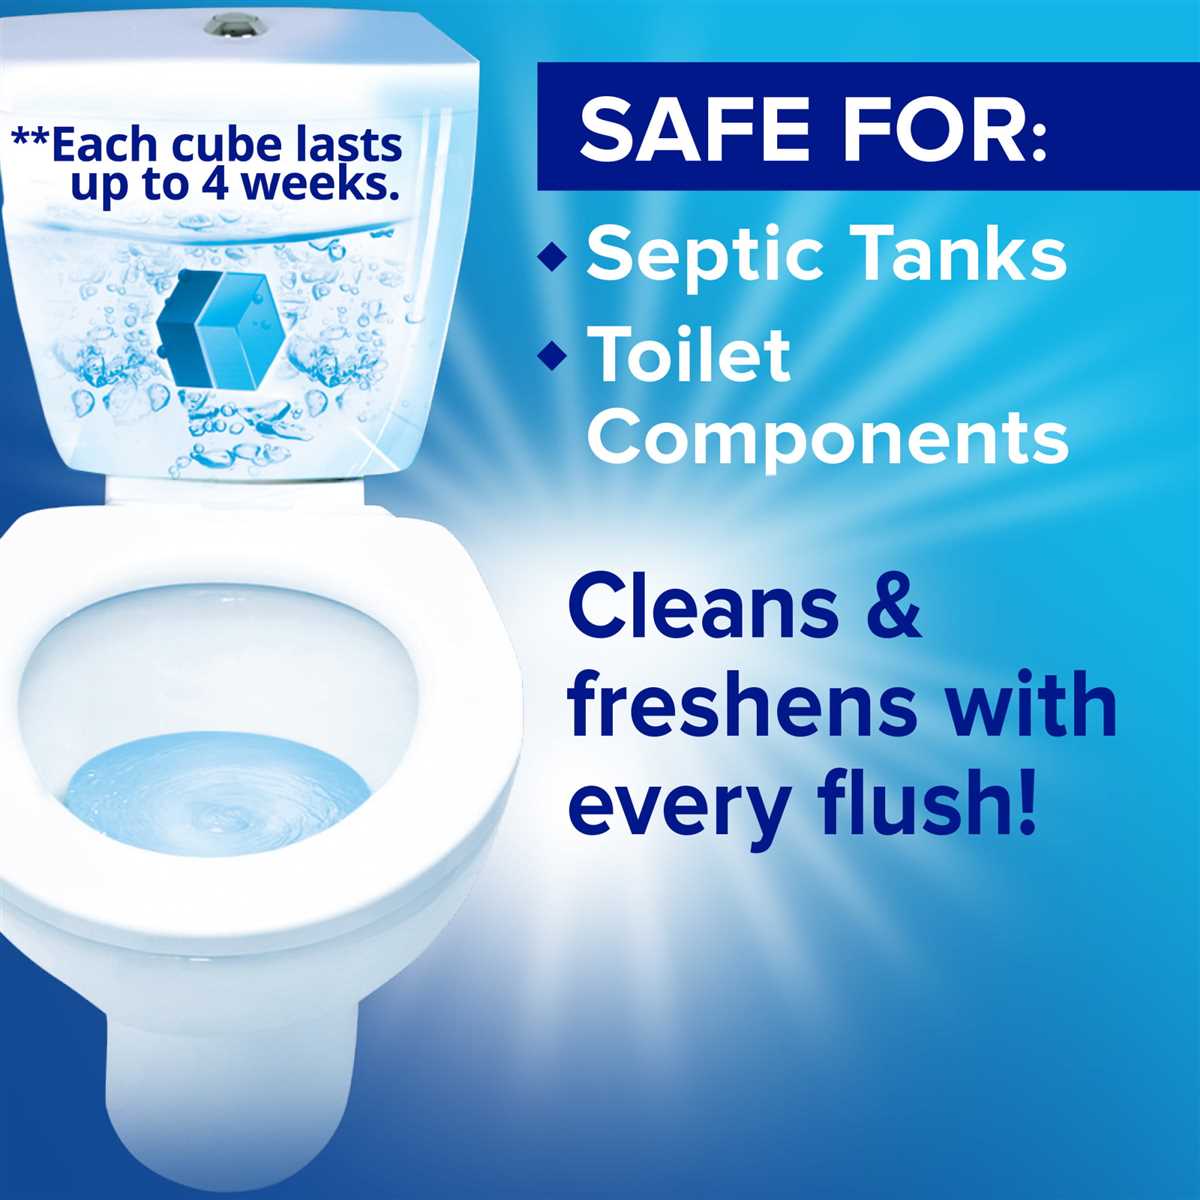 Is Toilet Duck Safe for Septic Tanks?